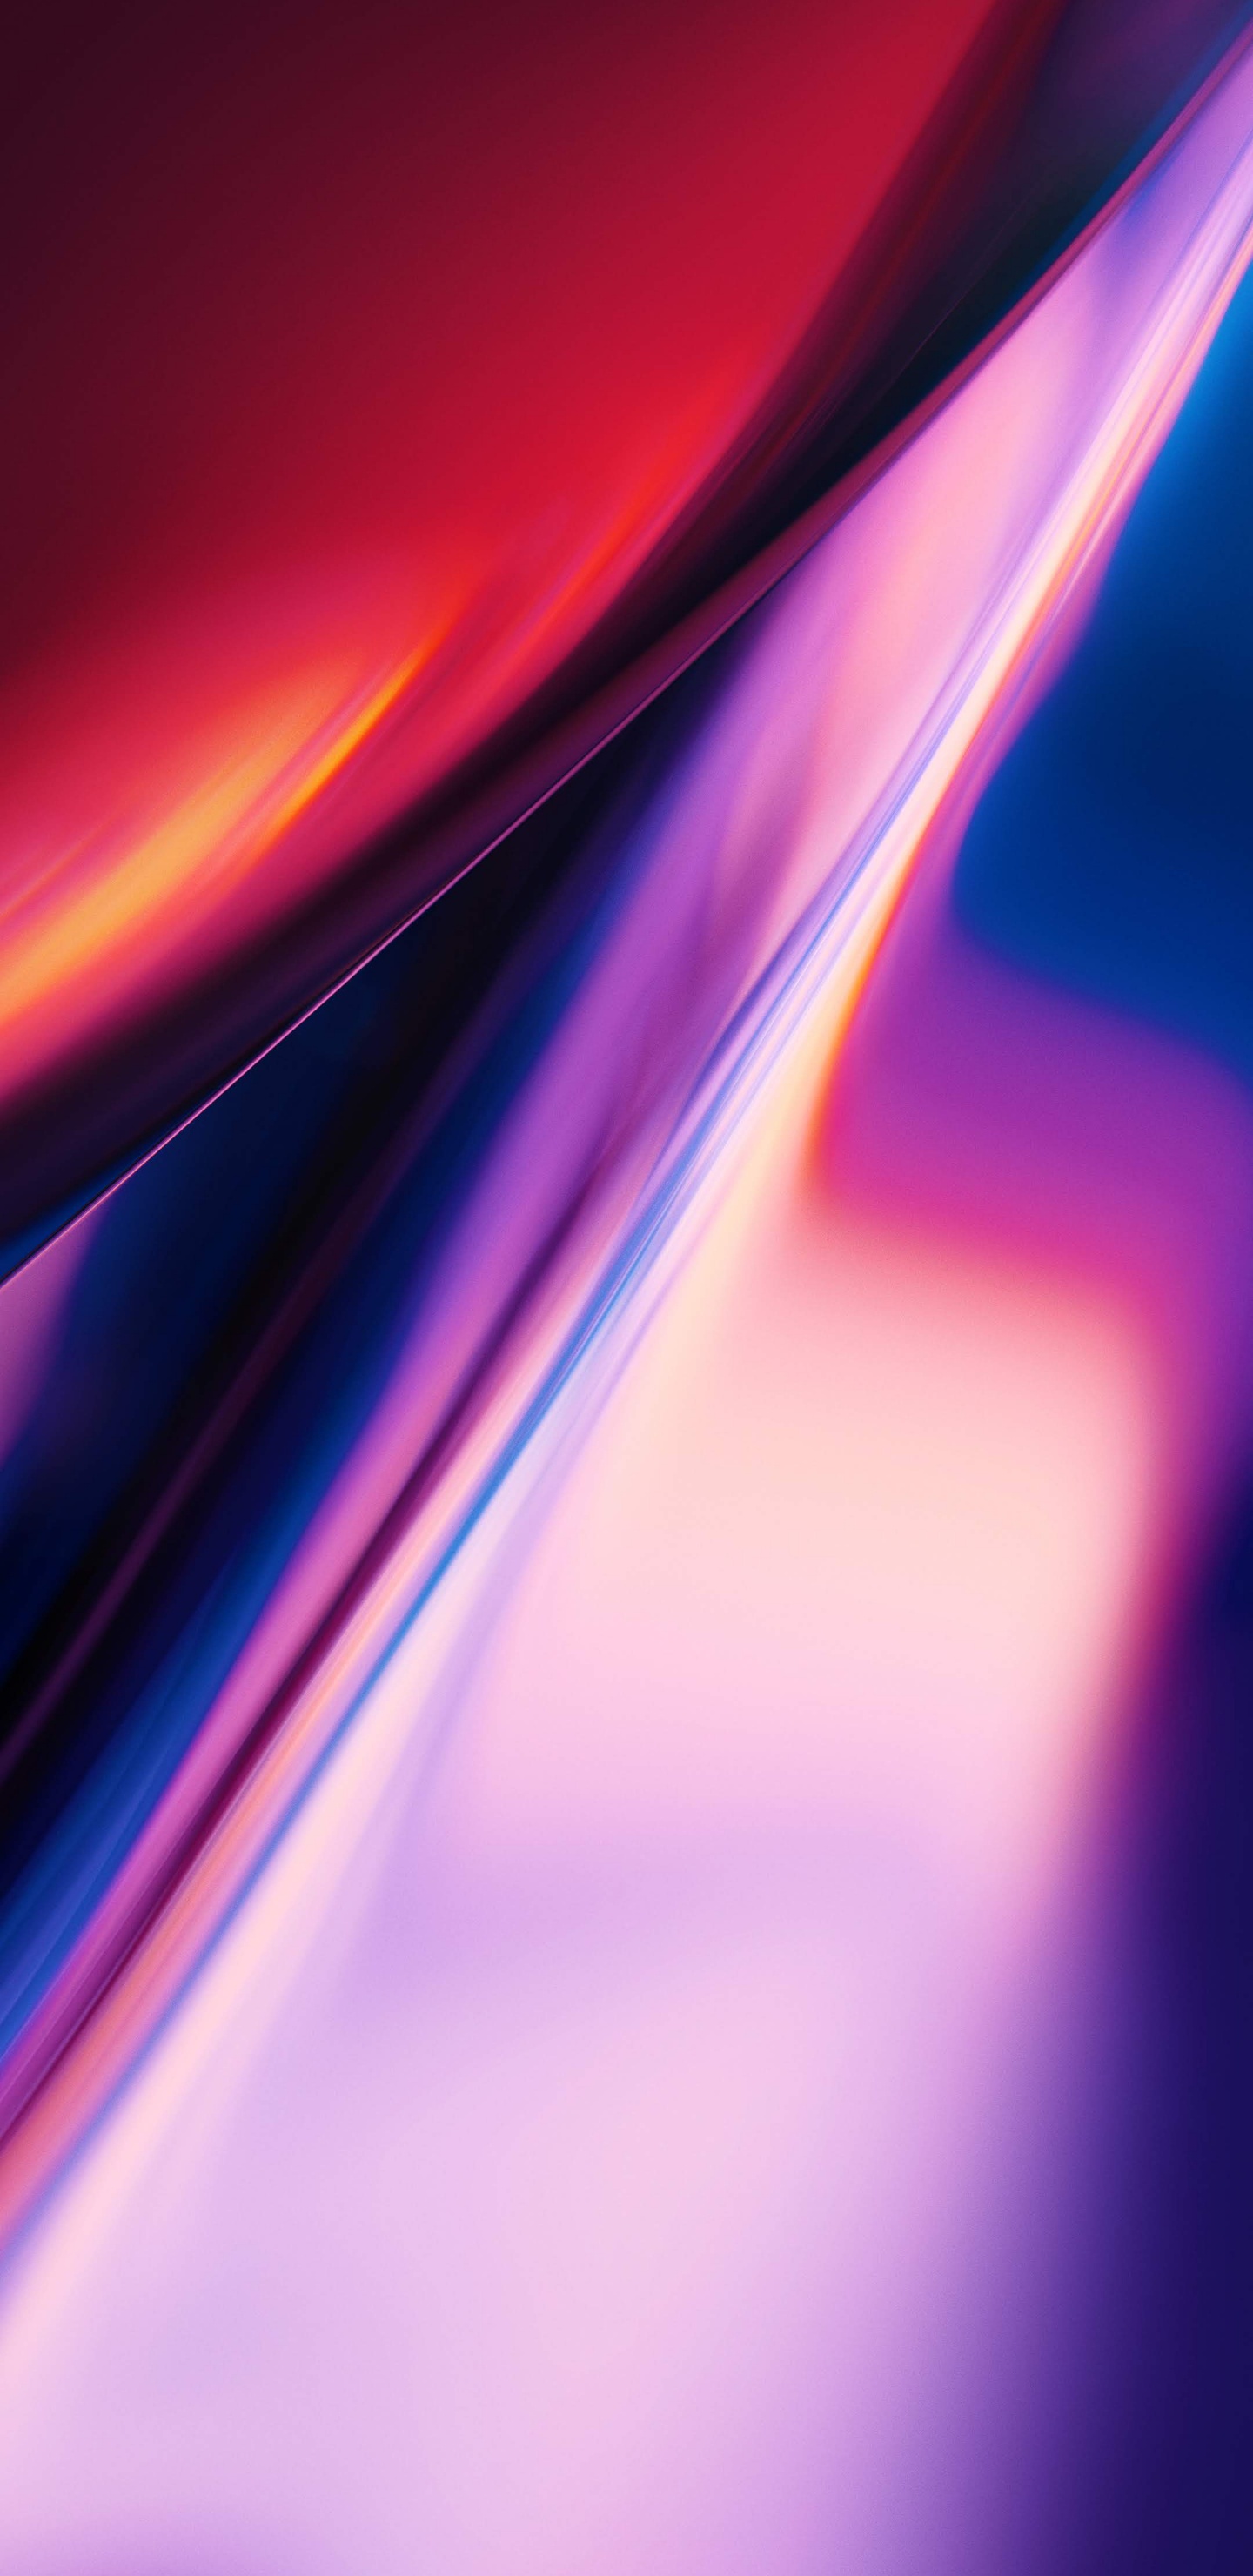 OnePlus 7 Pro, Oneplus 7t, Oneplus 8, Android, Colorfulness. Wallpaper in 1440x2960 Resolution